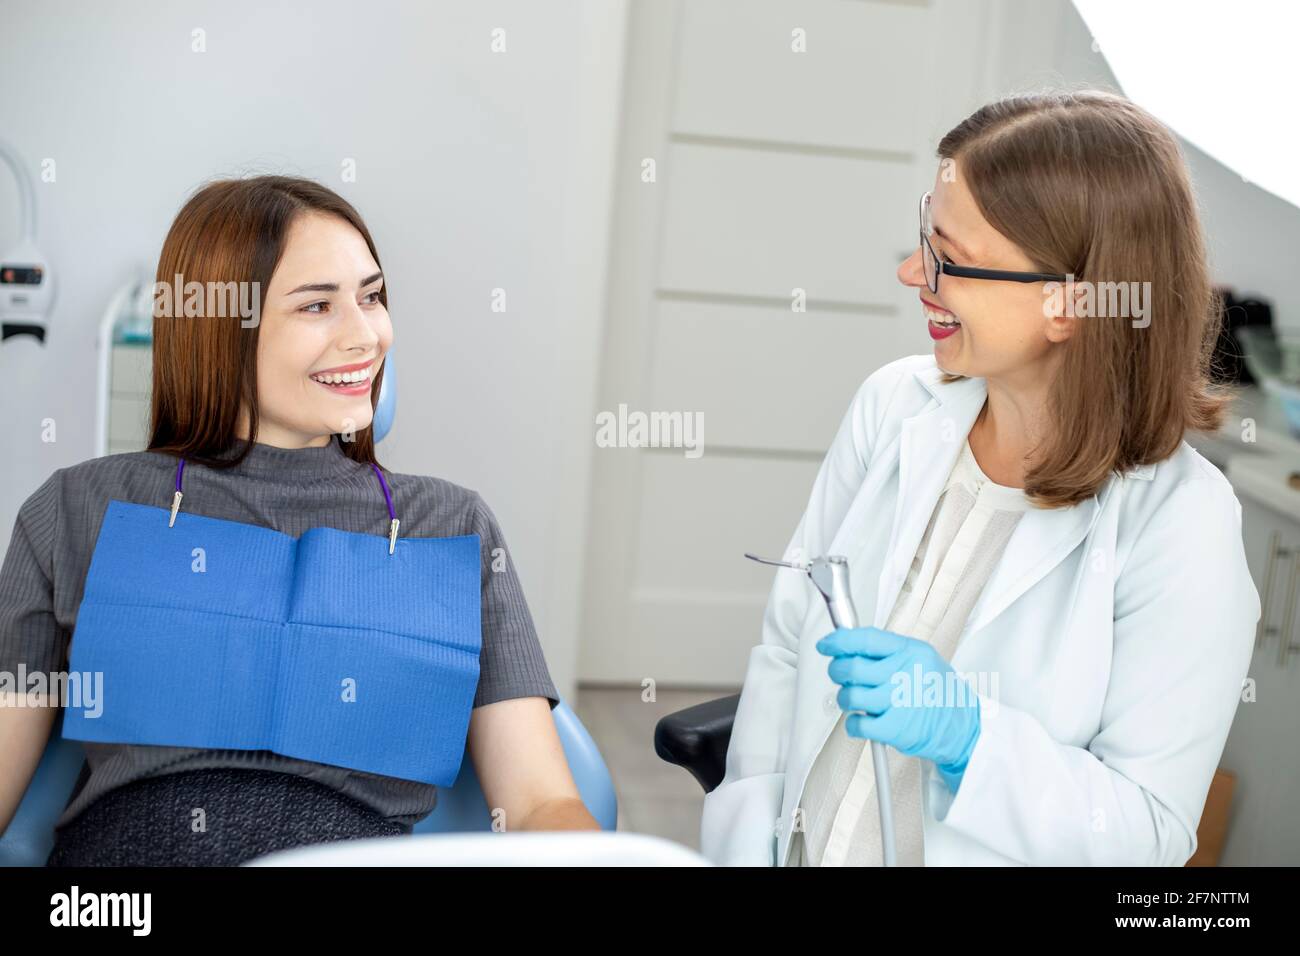 Dentist doctor treats a patient in a clinic. Young woman with white and healthy teeth. Stock Photo